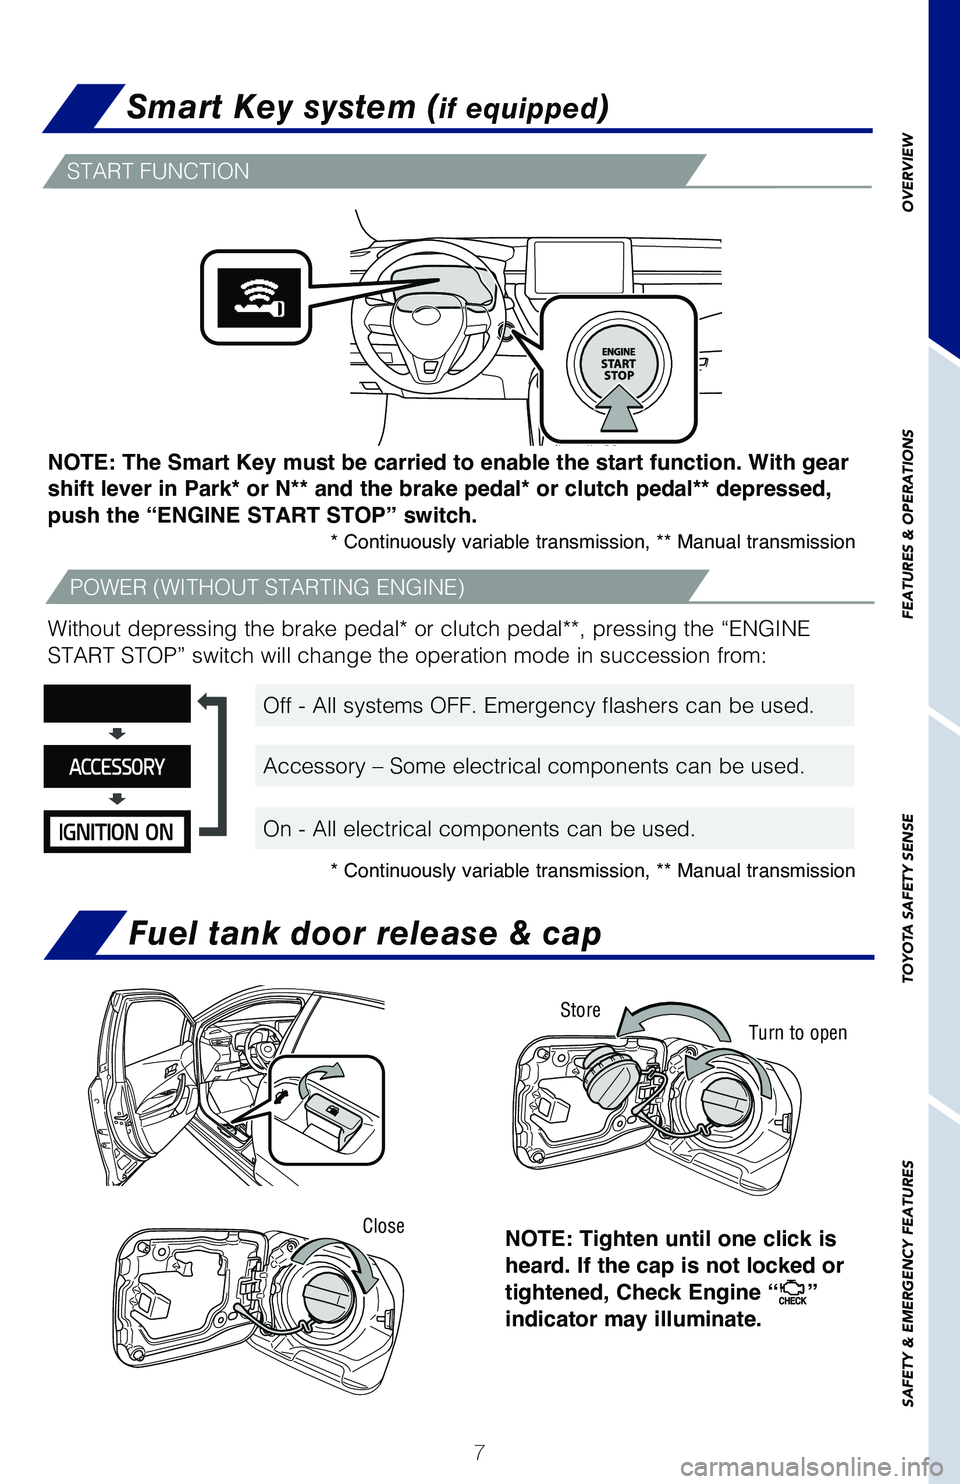 TOYOTA COROLLA 2020  Owners Manual (in English) 7
OVERVIEW
FEATURES & OPERATIONS
TOYOTA SAFETY SENSE
SAFETY & EMERGENCY FEATURES
Smart Key system (if equipped)
START FUNCTION
POWER (WITHOUT STARTING ENGINE)
Without depressing the brake pedal* or cl